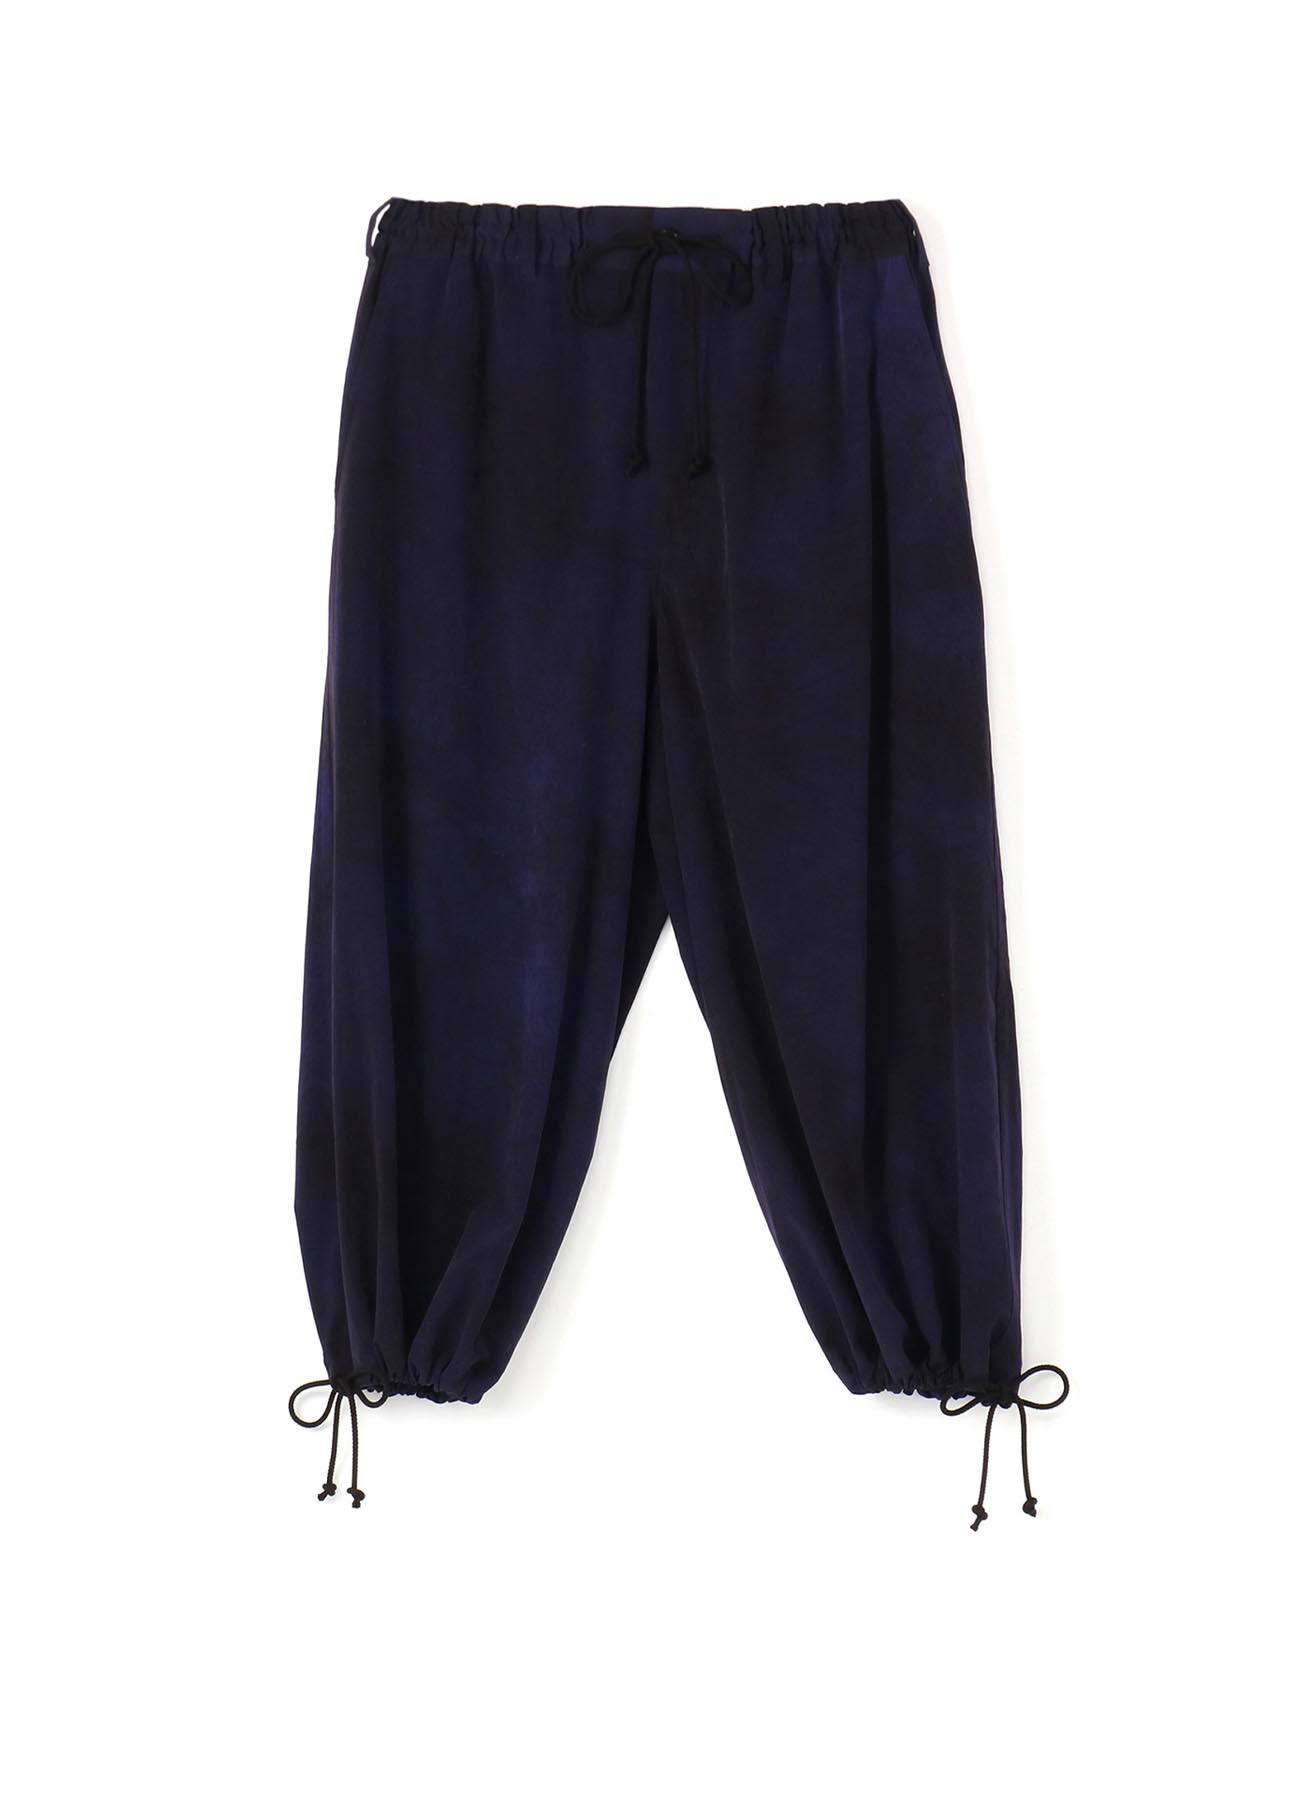 Uneven dyeing T/A vintage decyne Easy balloon pants